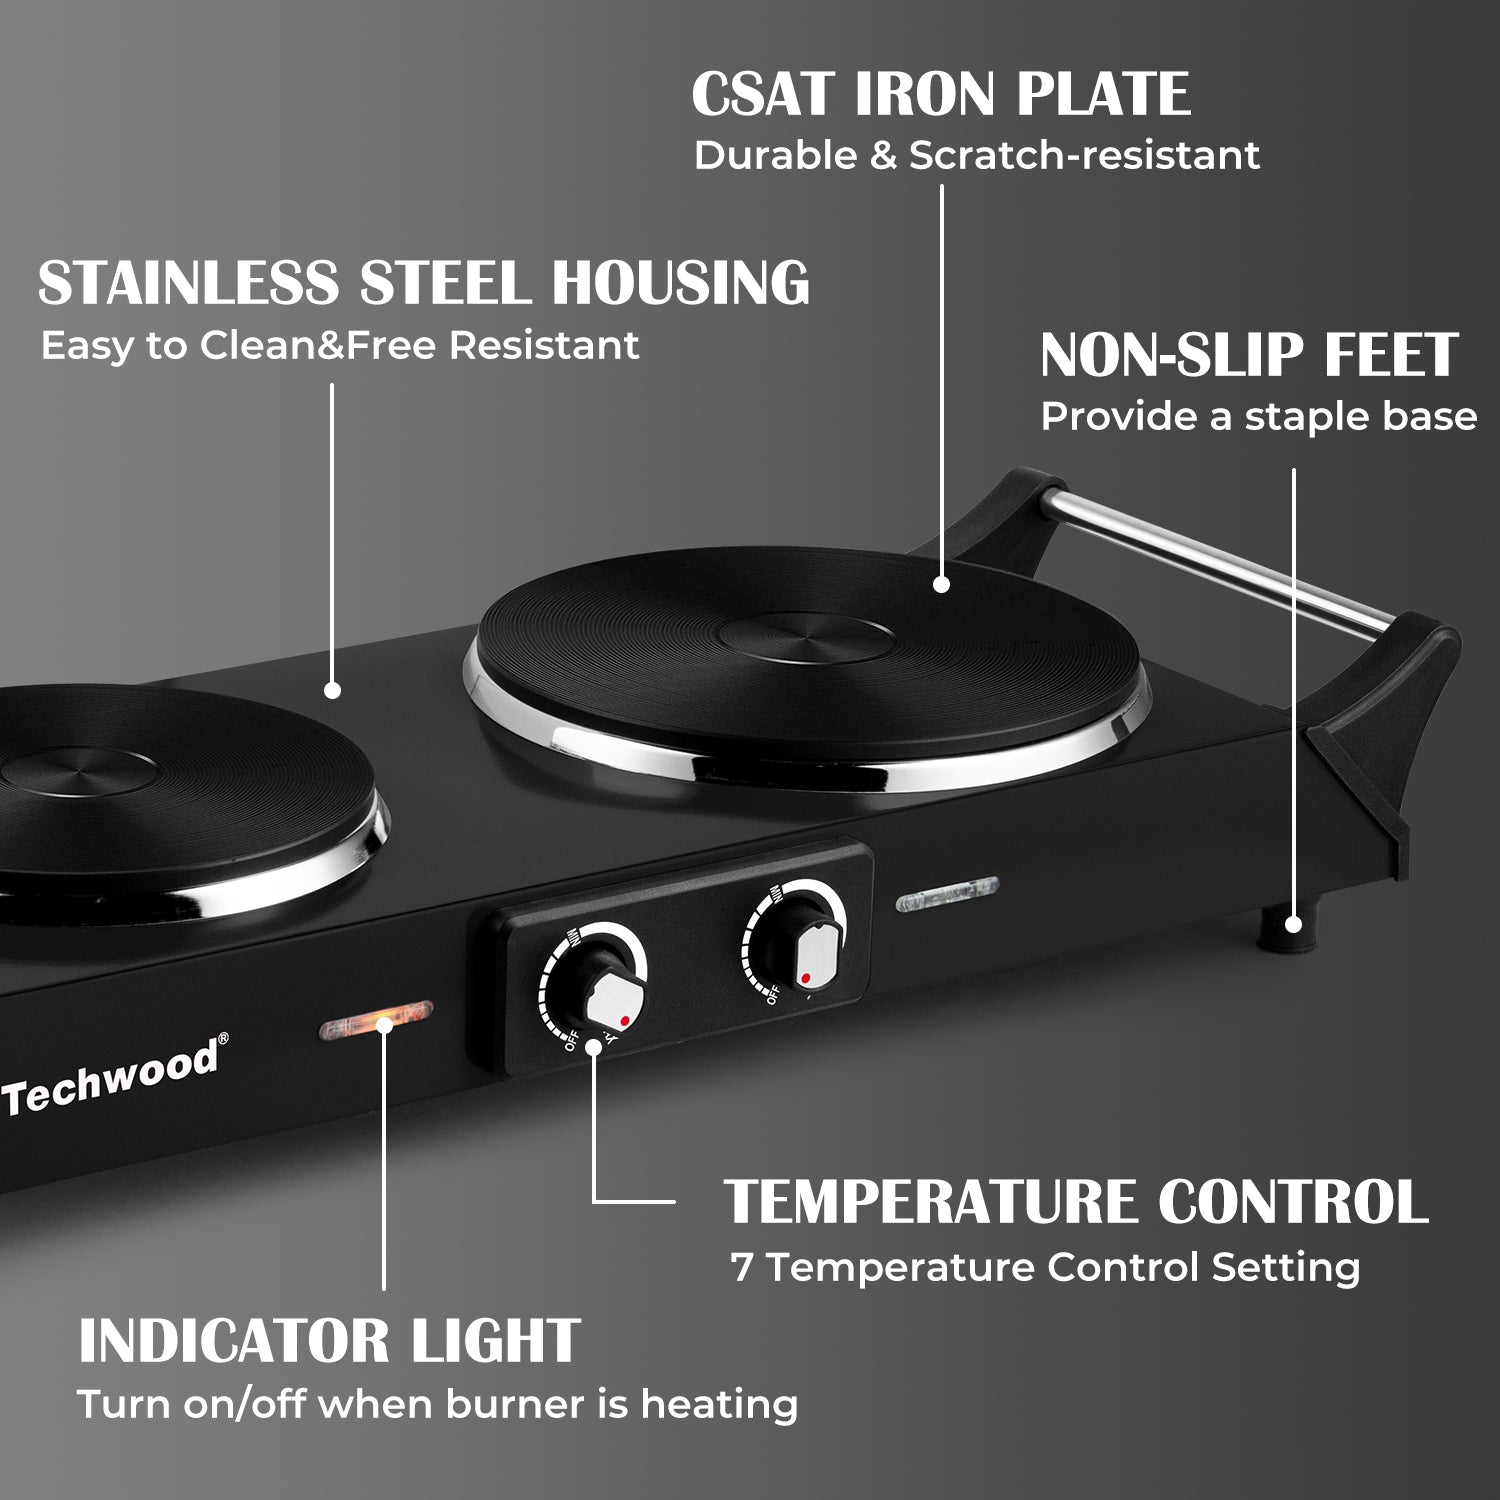 Hot Plate Electric Single Burner 1500W Portable Burner for Cooking with  Adjustable Temperature & Stay Cool Handles, Non-Slip Rubber Feet, Stainless